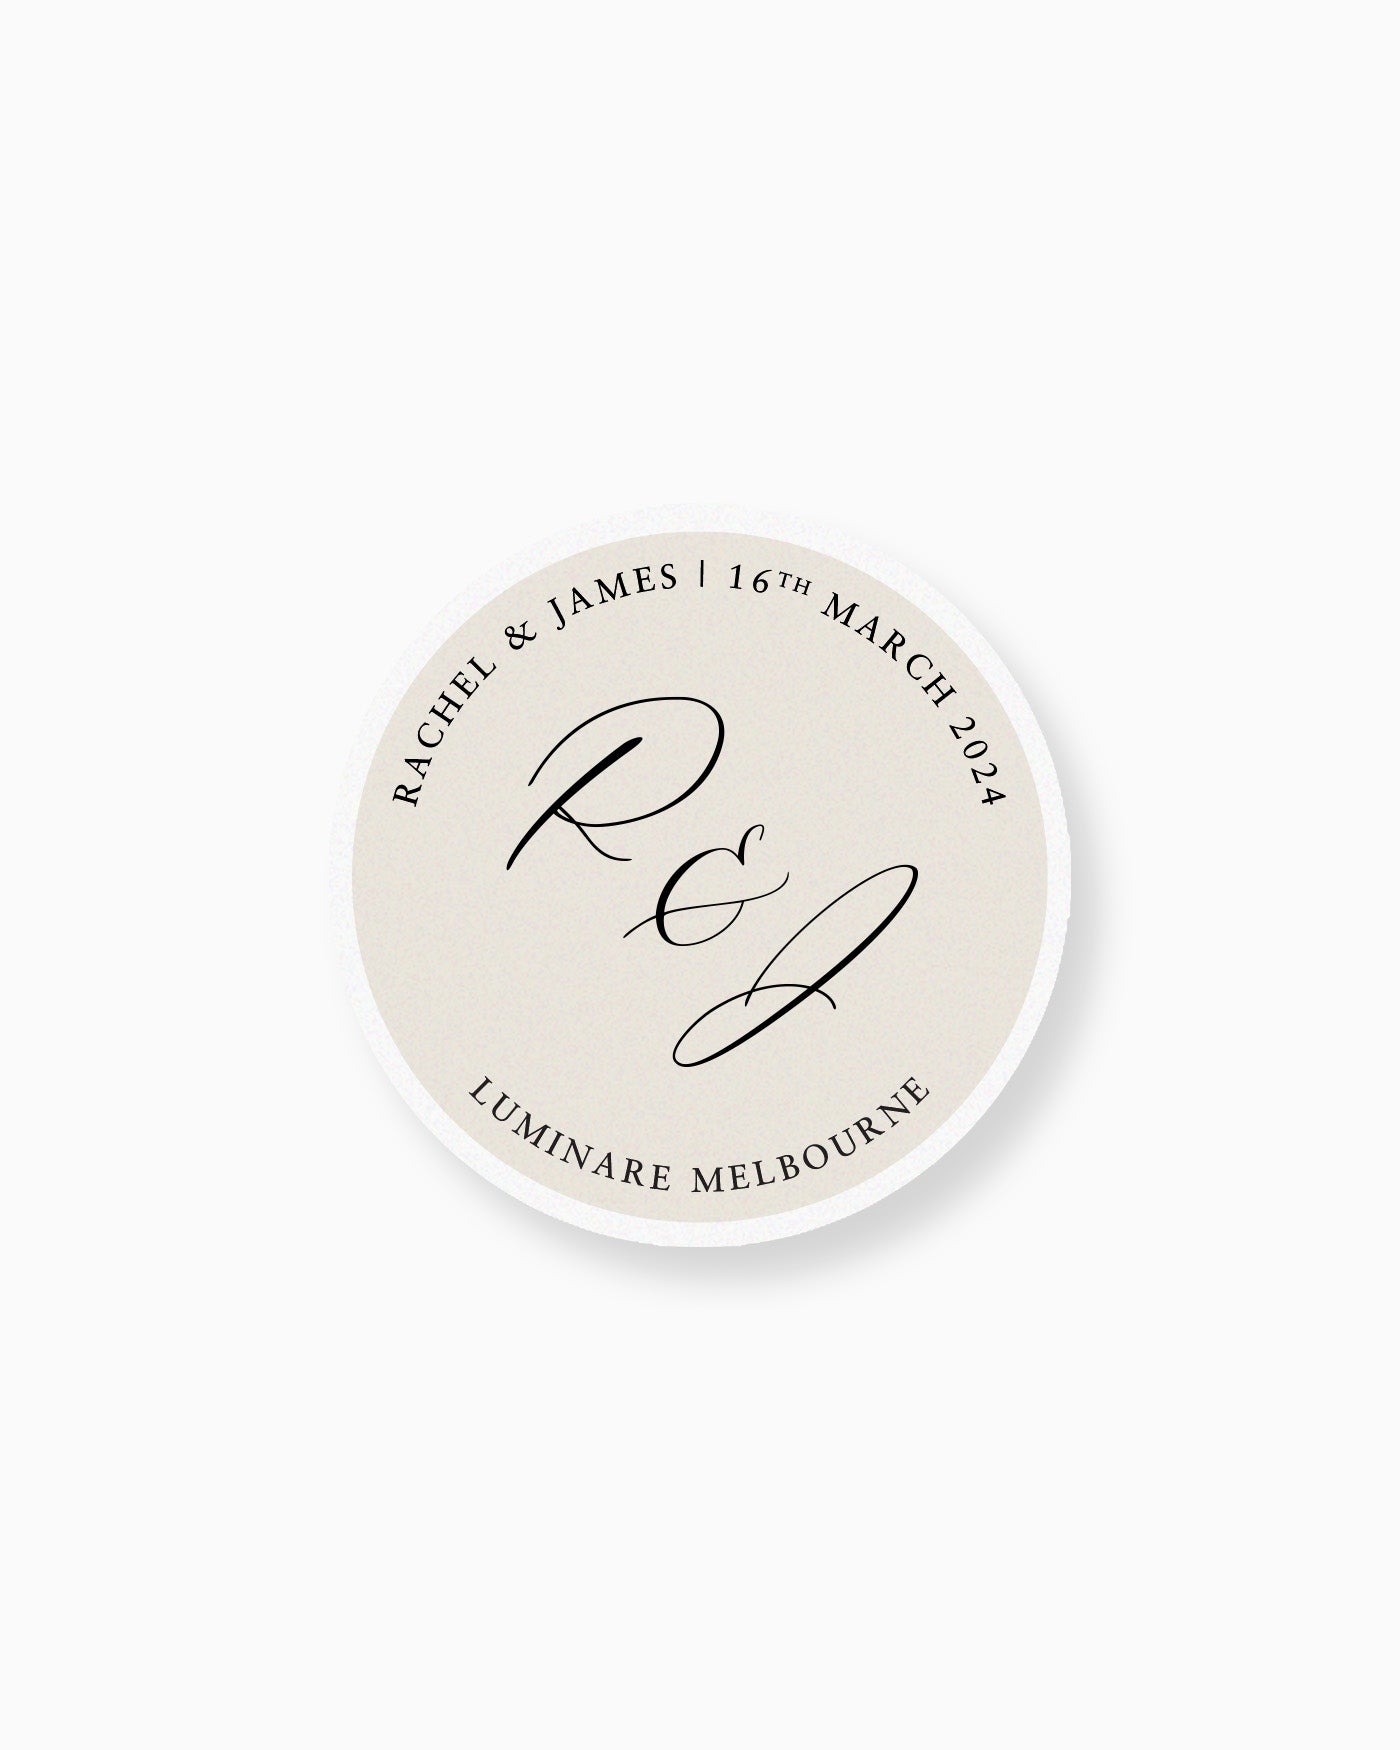 Peppermint Press On the Day Amour Keepsake Coaster